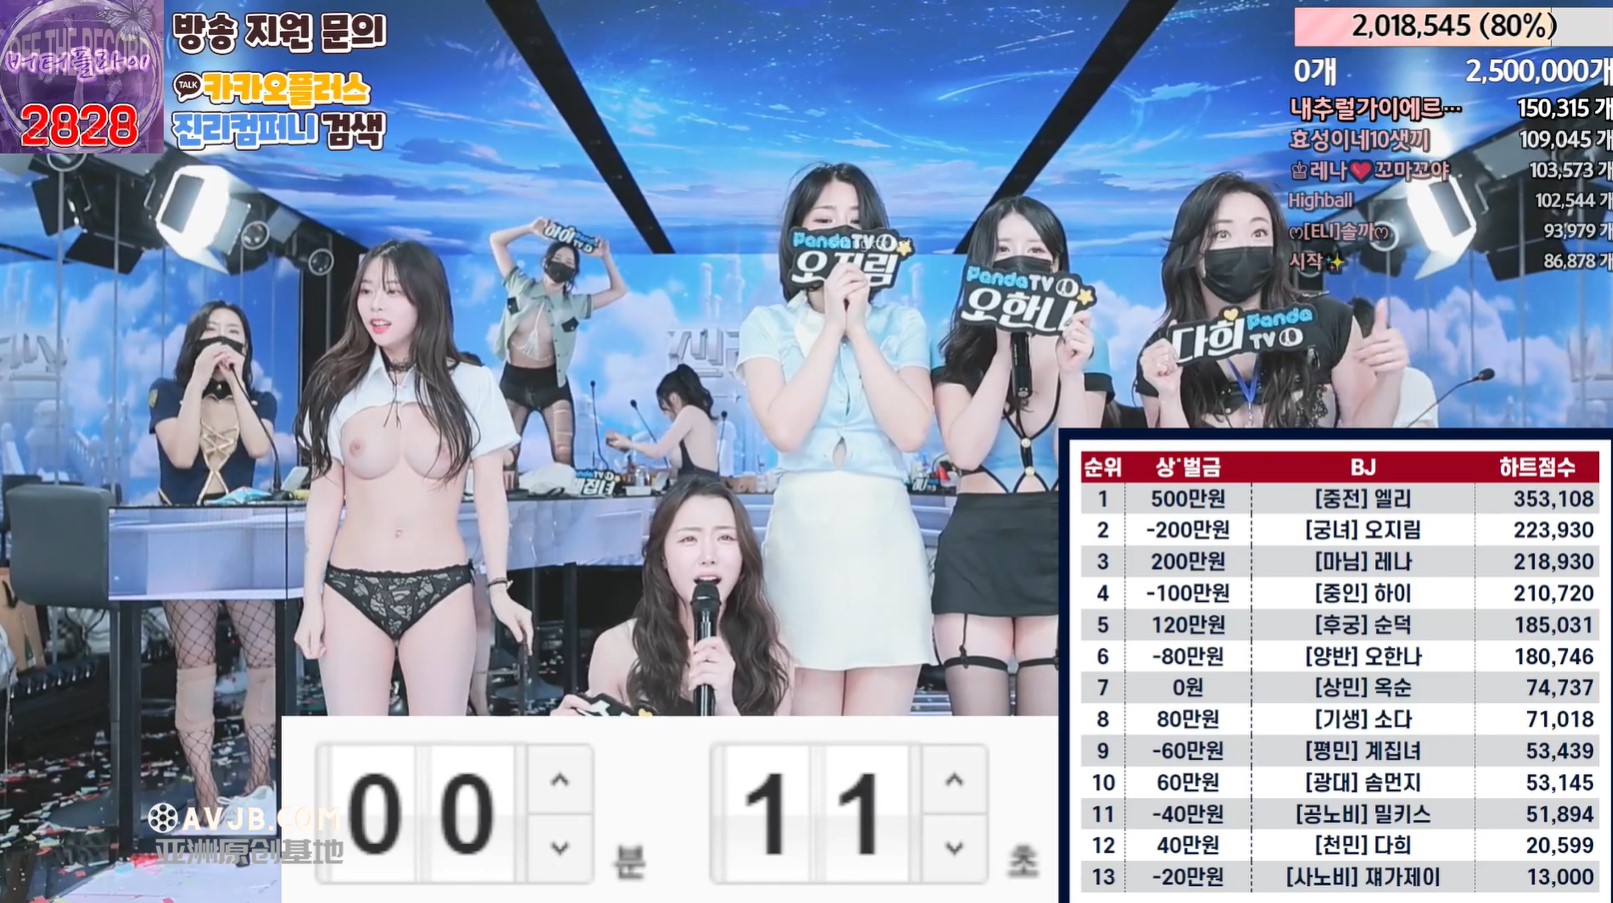 March 2024, the king of the bomb, worth 3,000 yuan a group of female pornographic broadcast [jinricp] Korean BJ girl group appeared, naked dance over the milk shaking 6 hours, the prize money competition